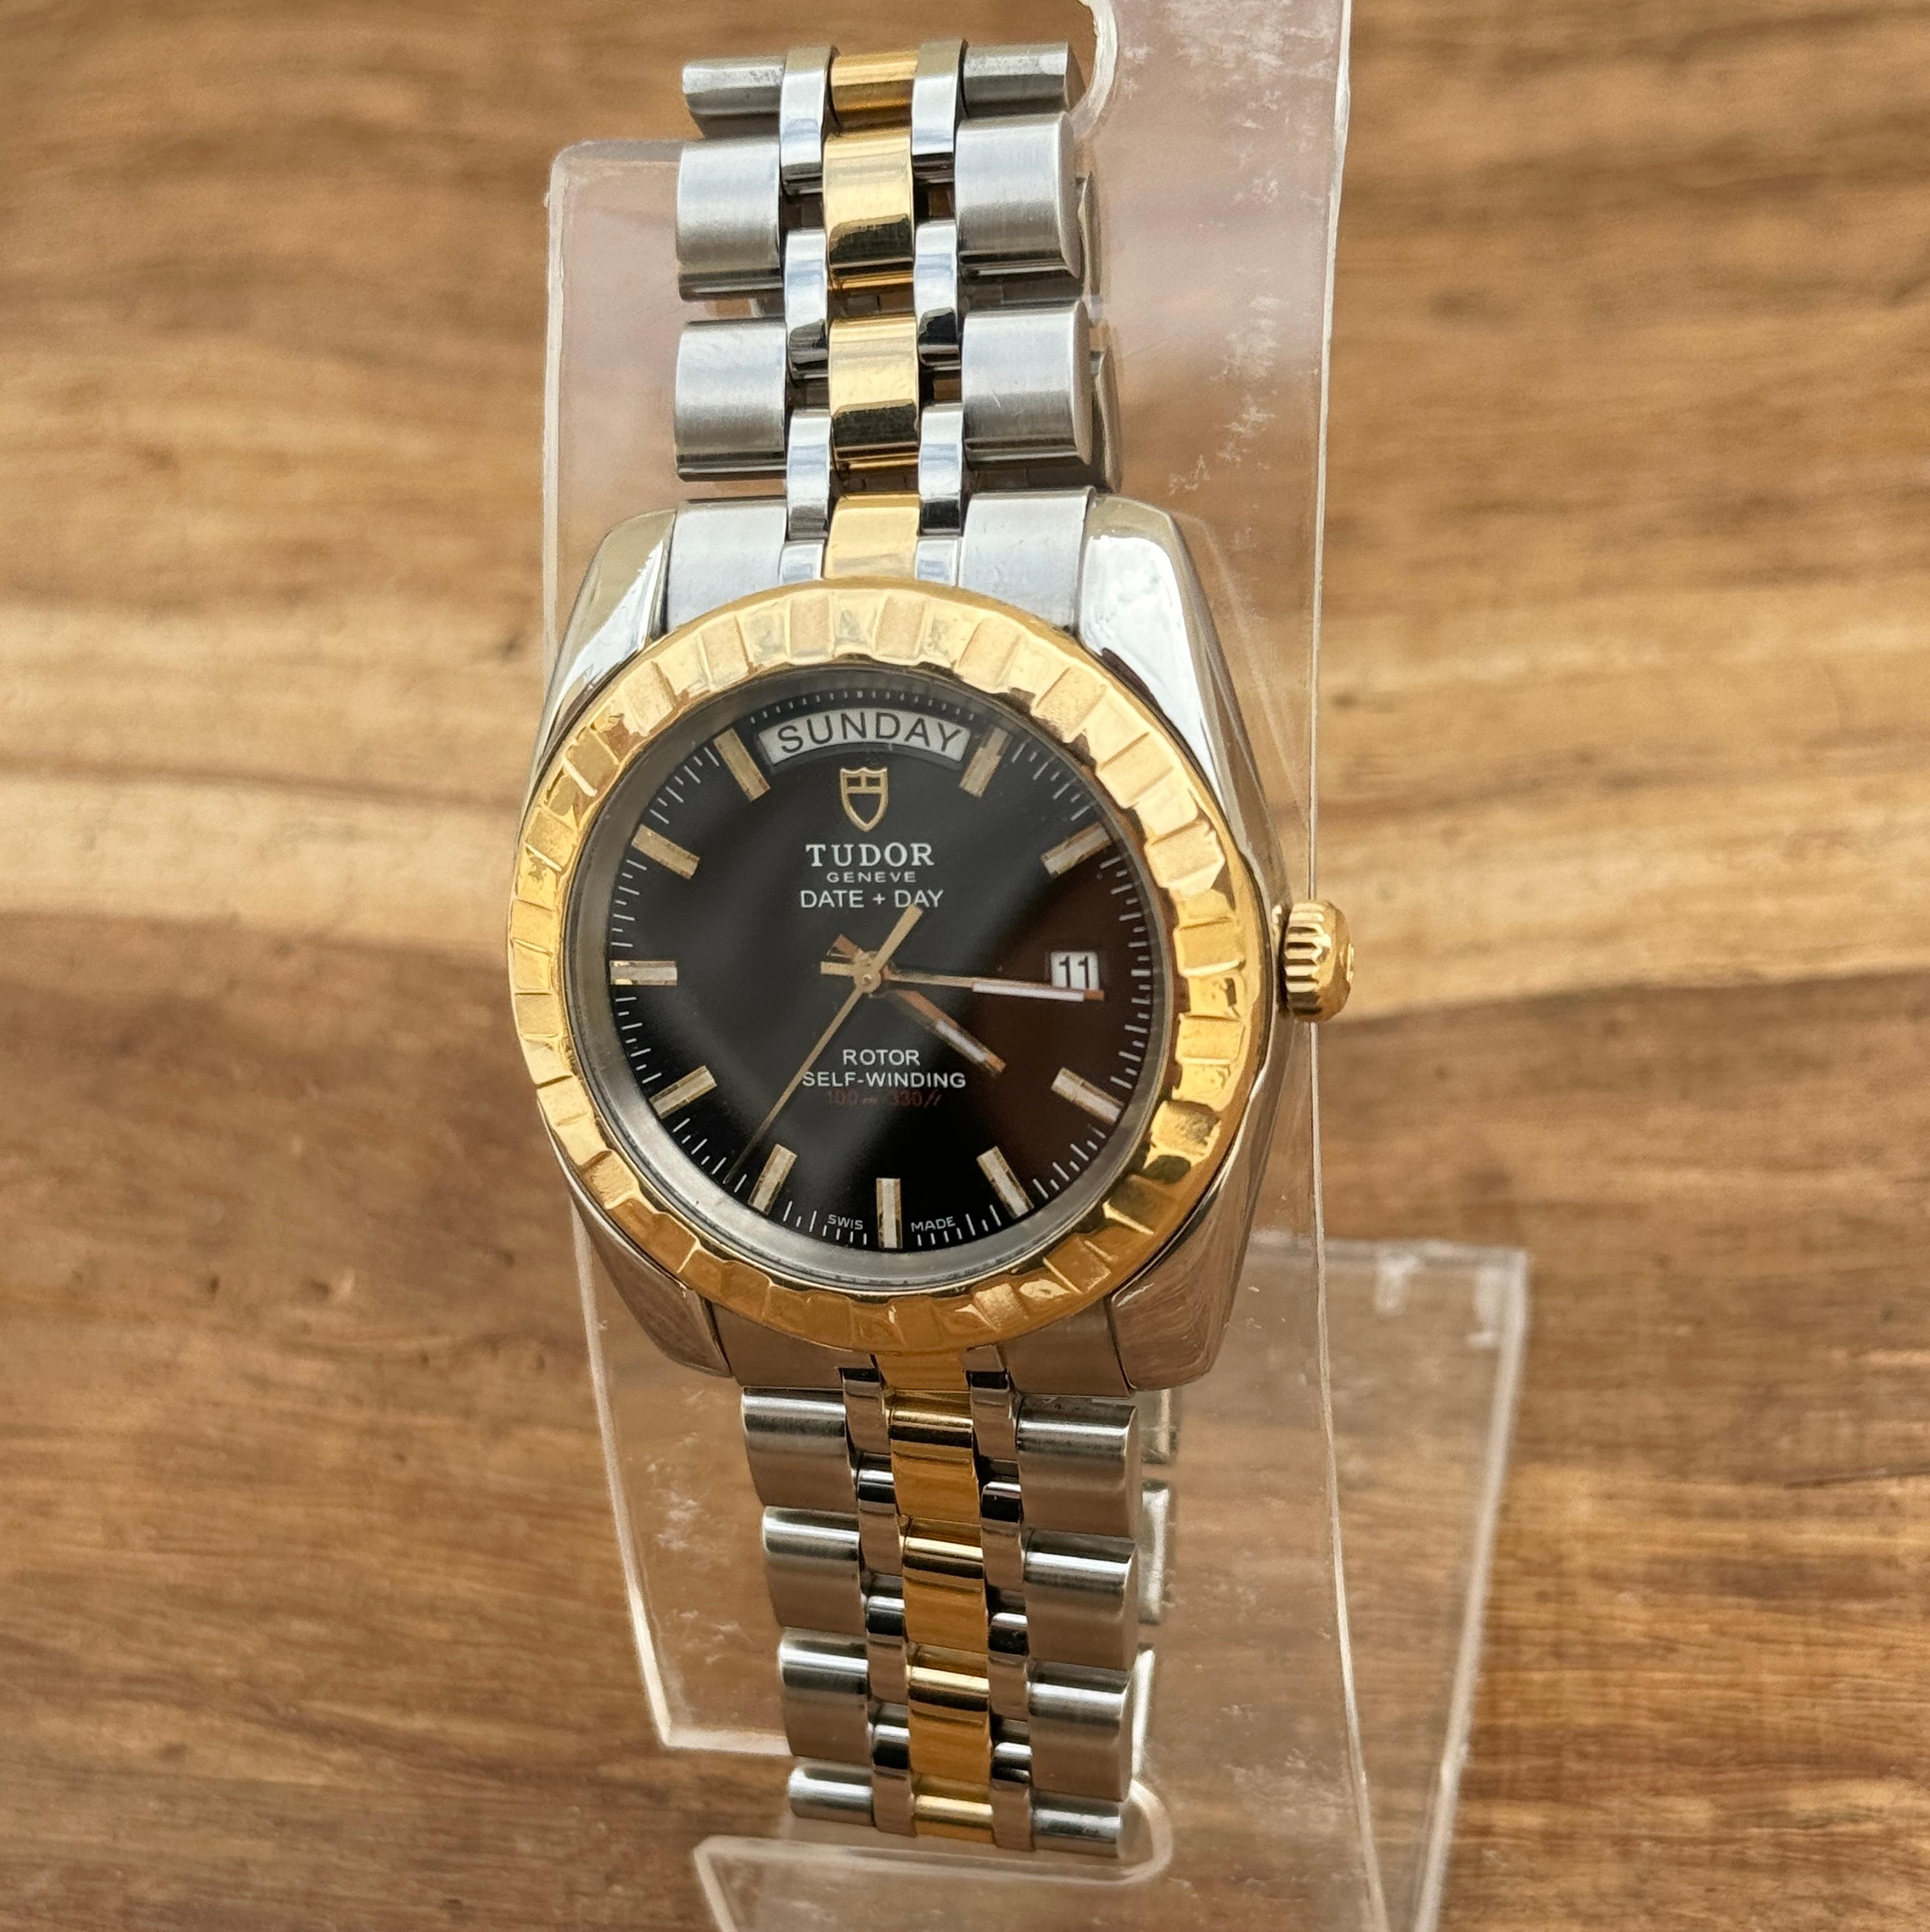 Tudor Classic Day Date 23013 Black Dial Watch For Sale 15